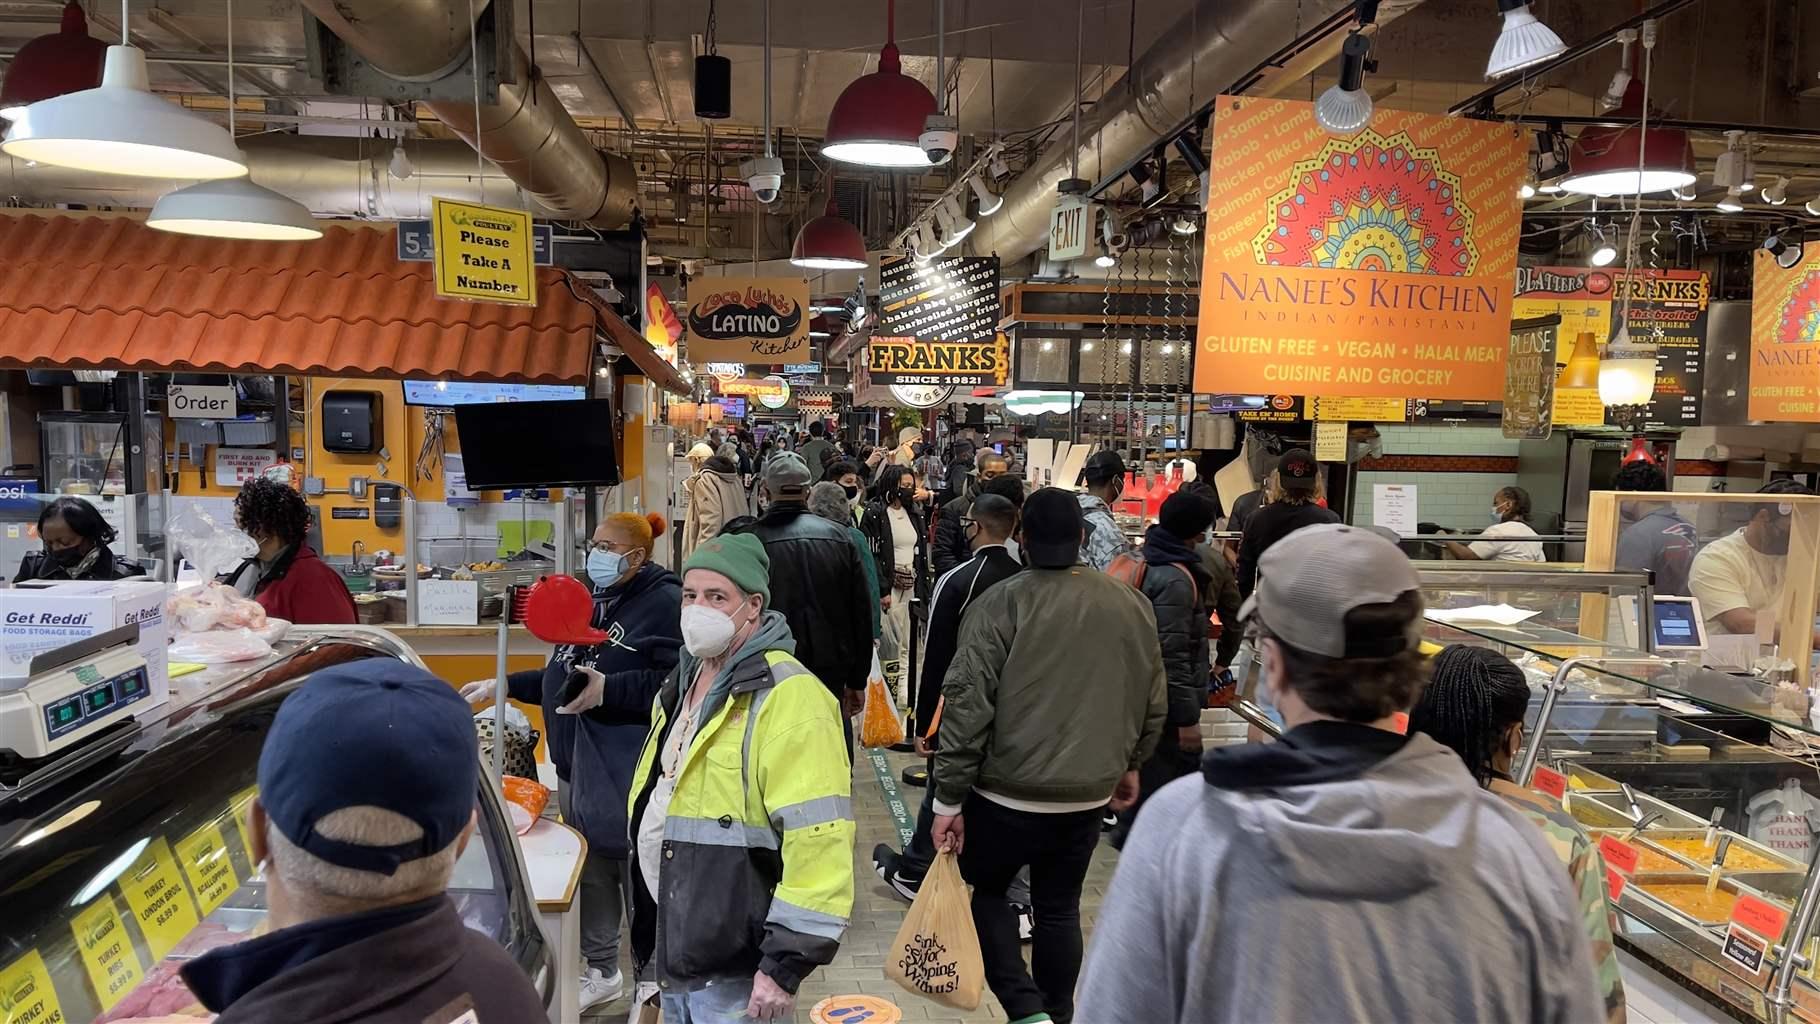 Shoppers are seen gathering inside the indoor Farmer's Market (since 1892) in Philadelphia, Pennsylvania, on March 19, 2021 amid the Coronavirus pandemic restrictions.